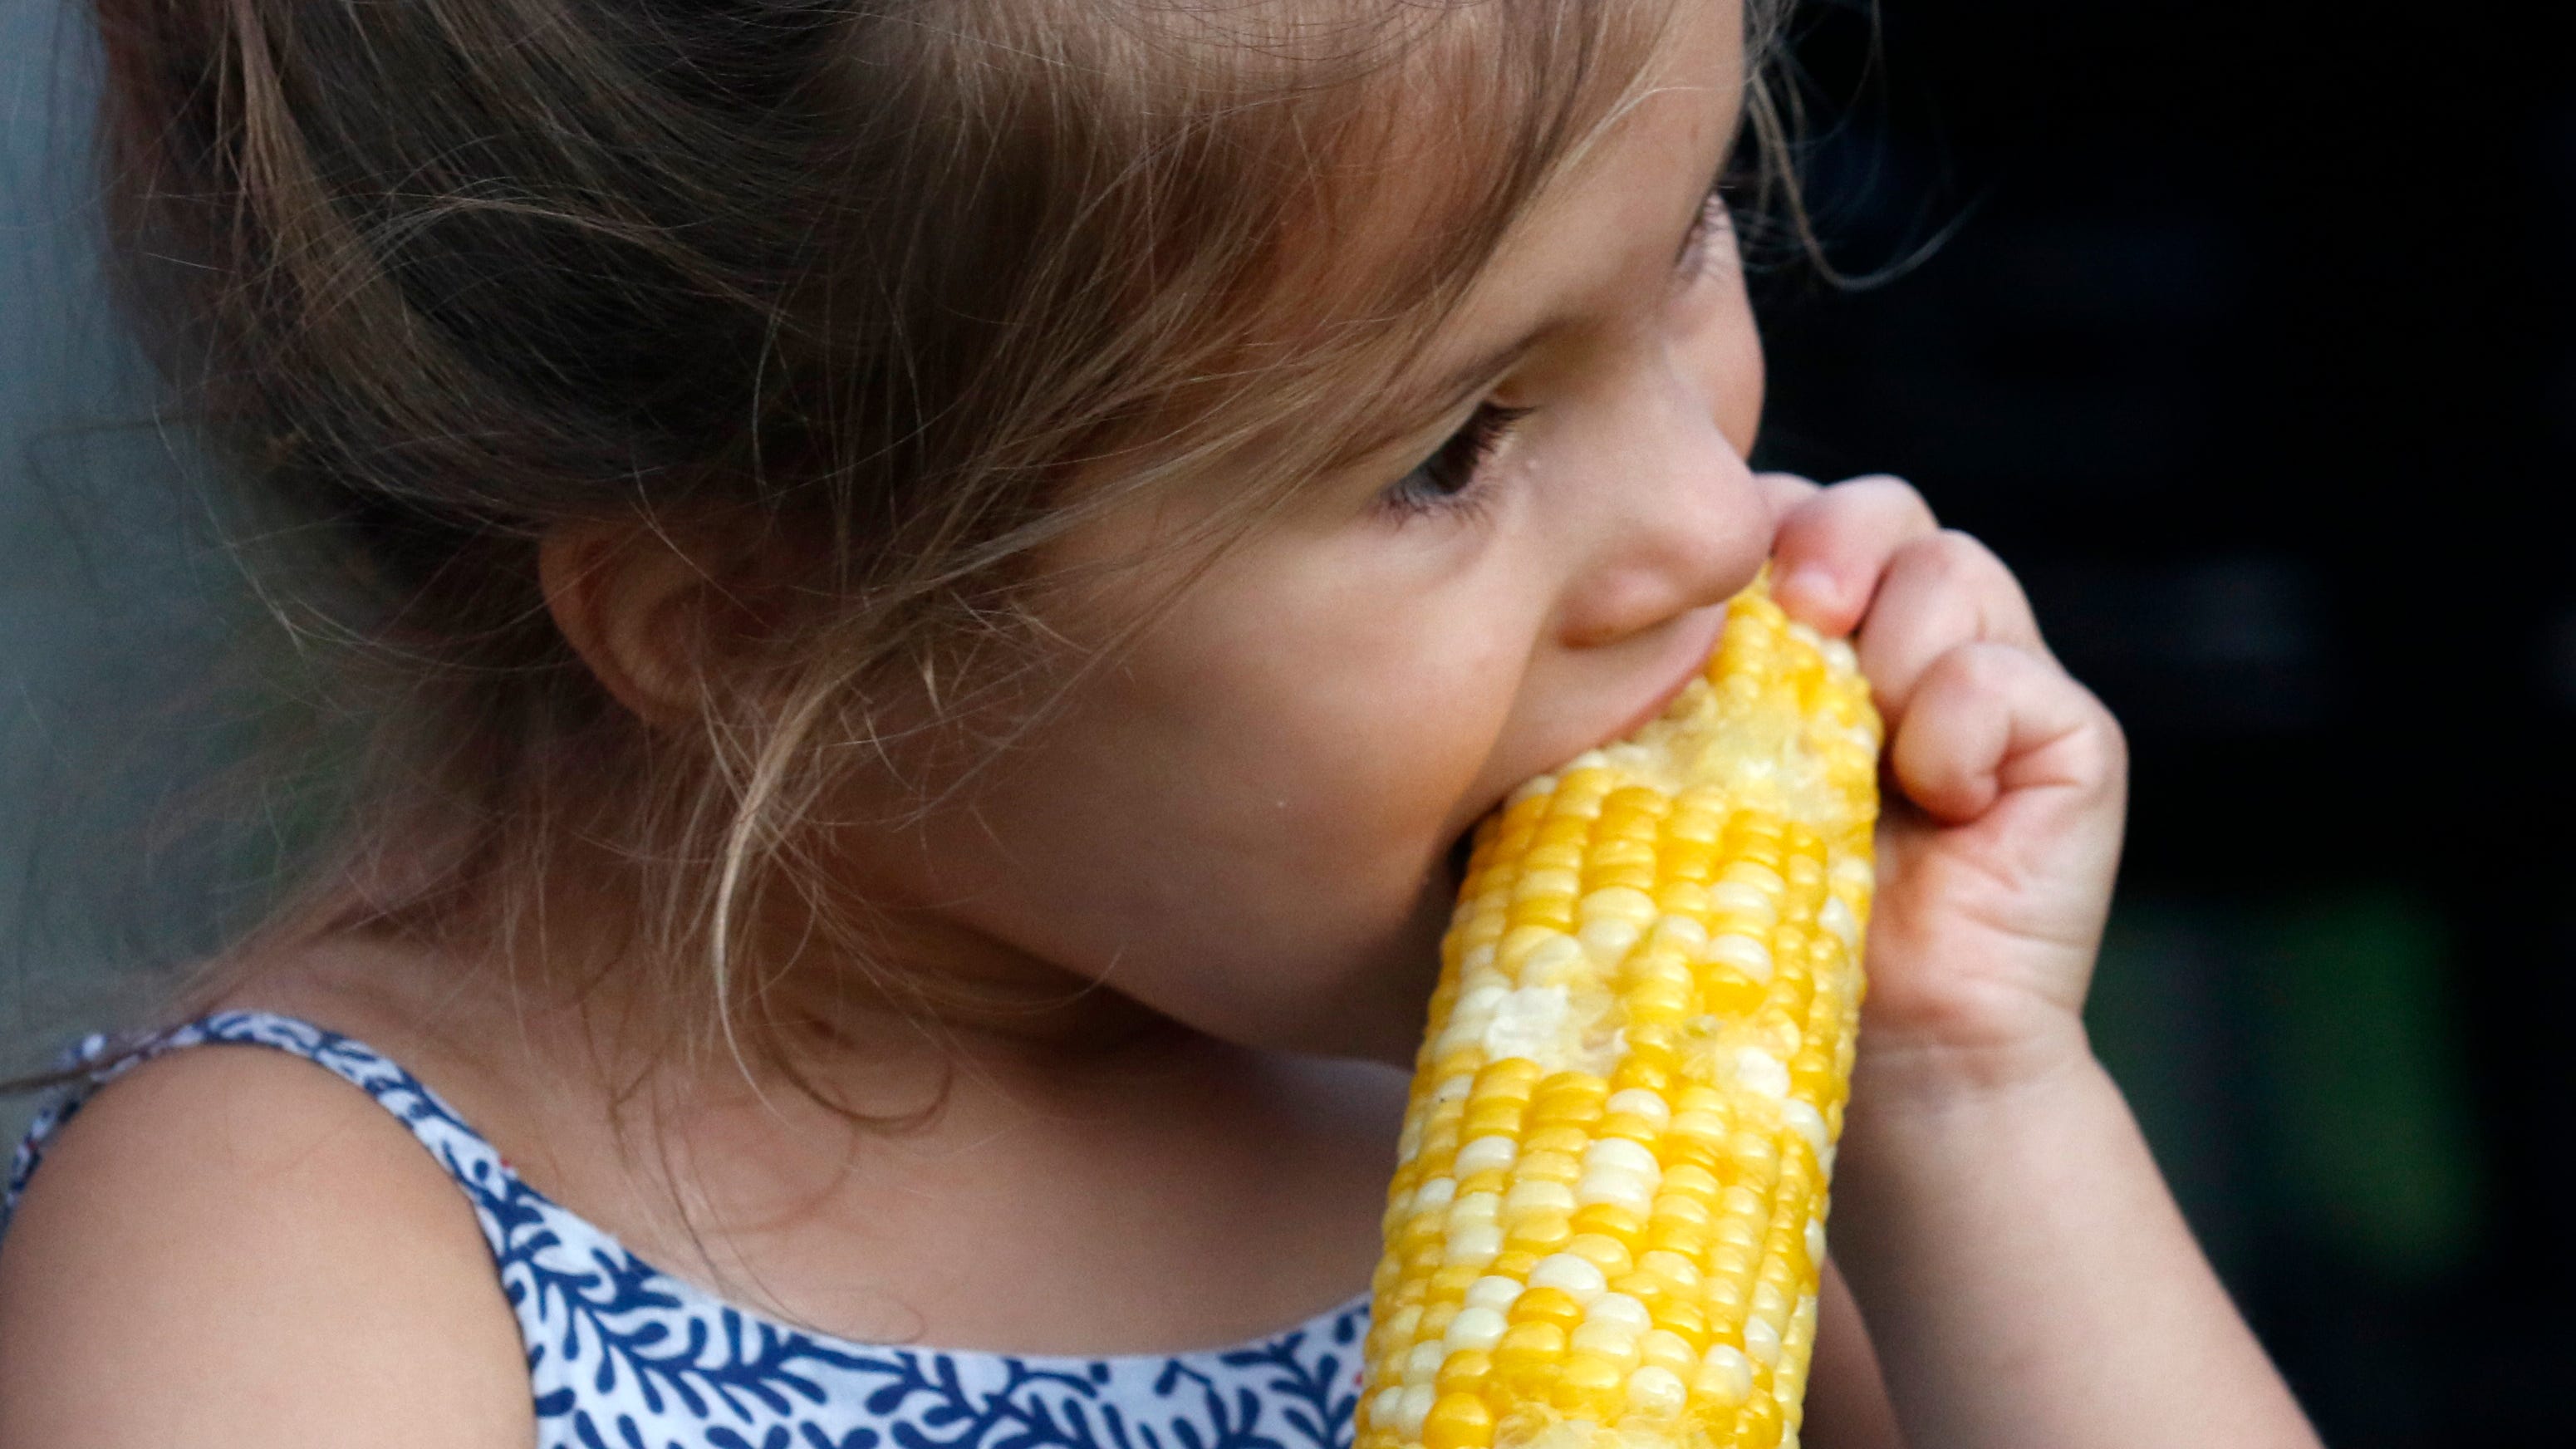  Millersport news: Sweet Corn Festival to return this year 